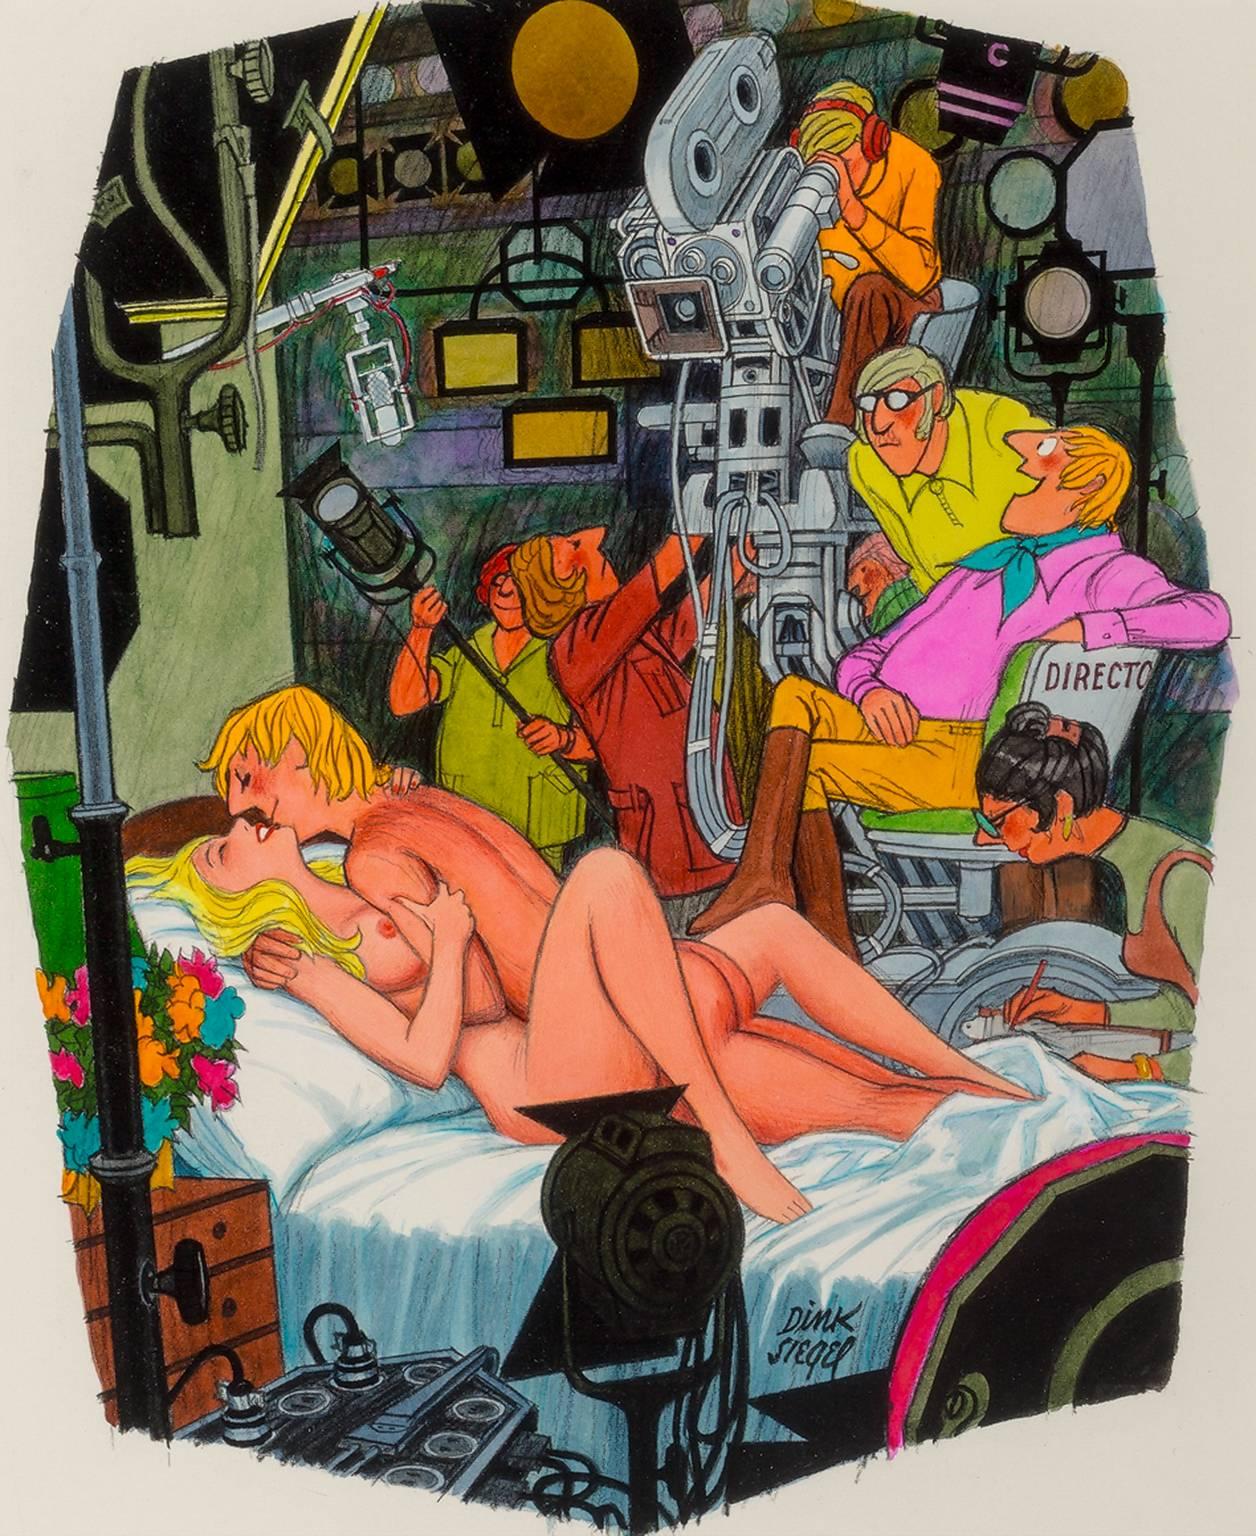 Dink Siegel Figurative Painting - That's a Wrap, Playboy cartoon Illustration ,